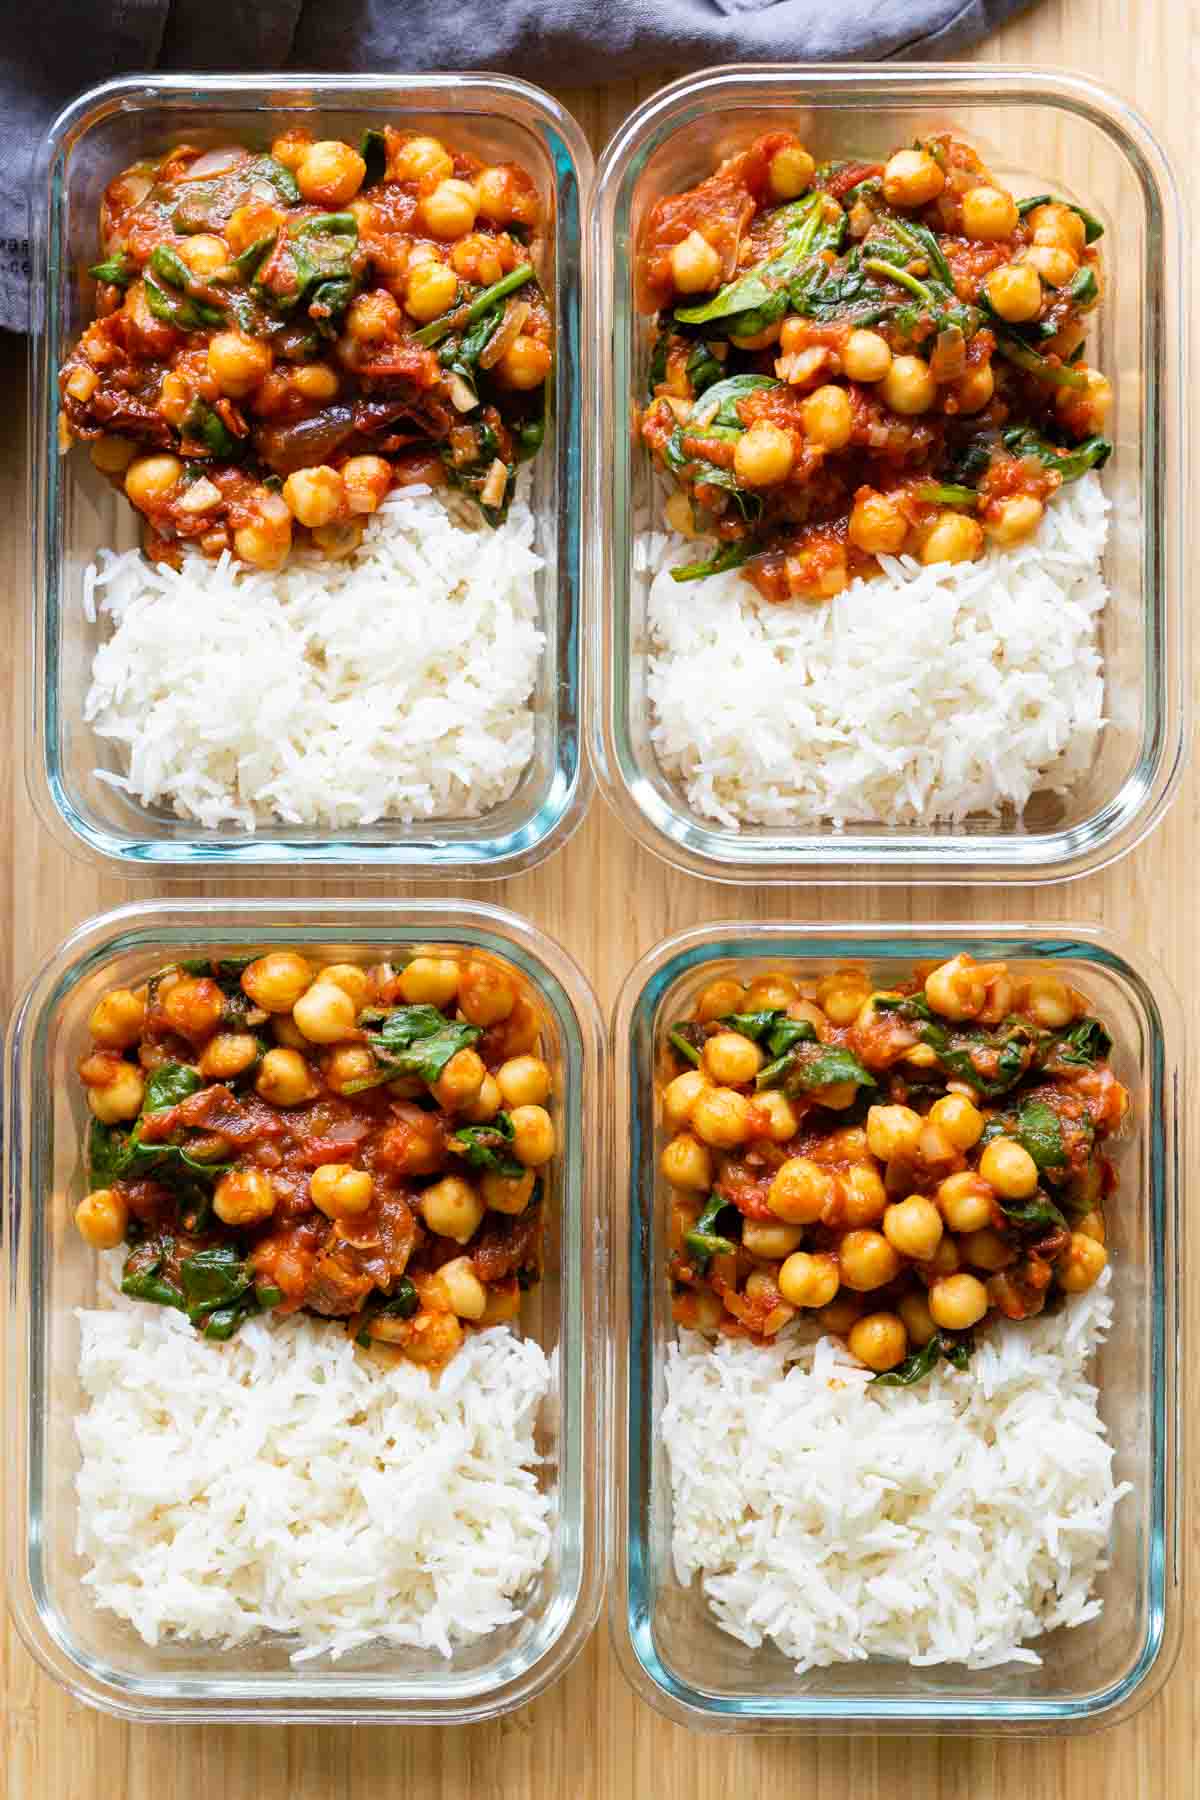 Four chipotle chickepe meal prep bowls next to each other showing white rice and chickpea stew.